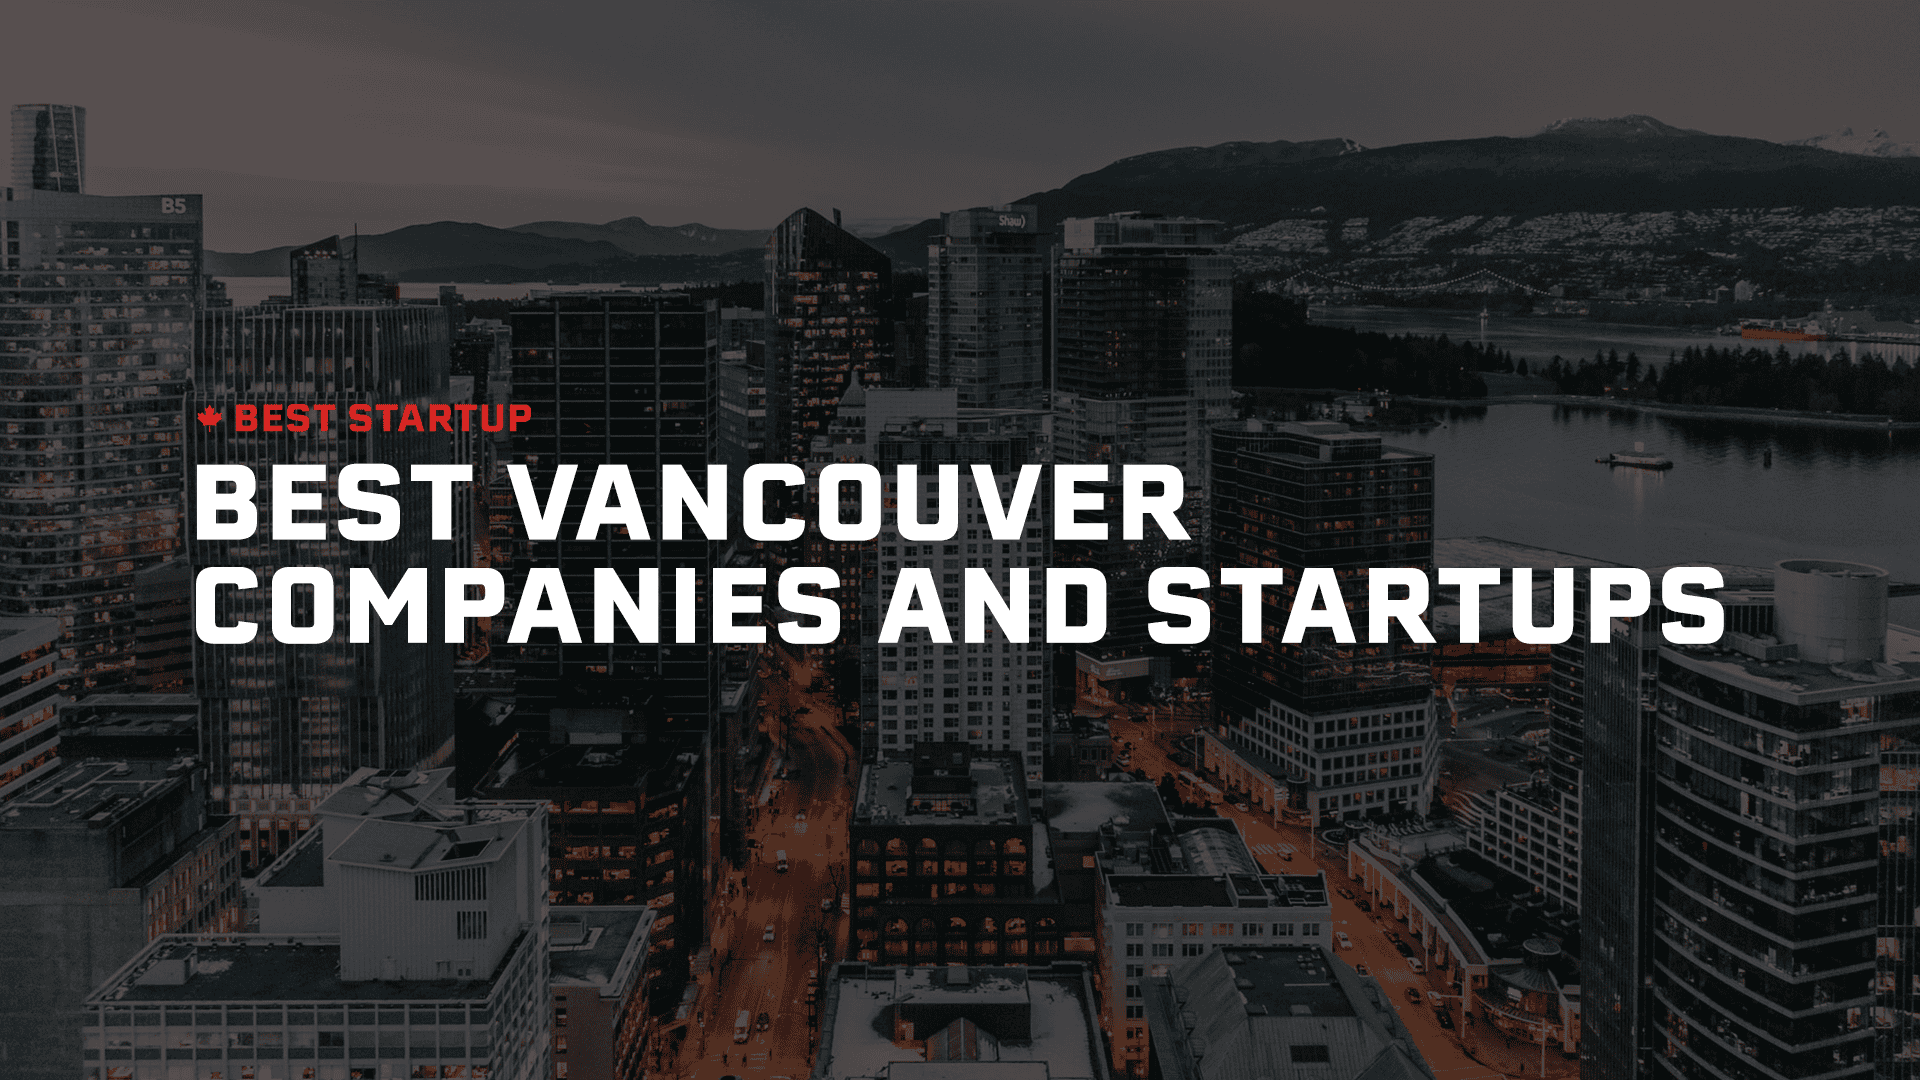 101 Top Social Media Startups and Companies in Vancouver (2021)